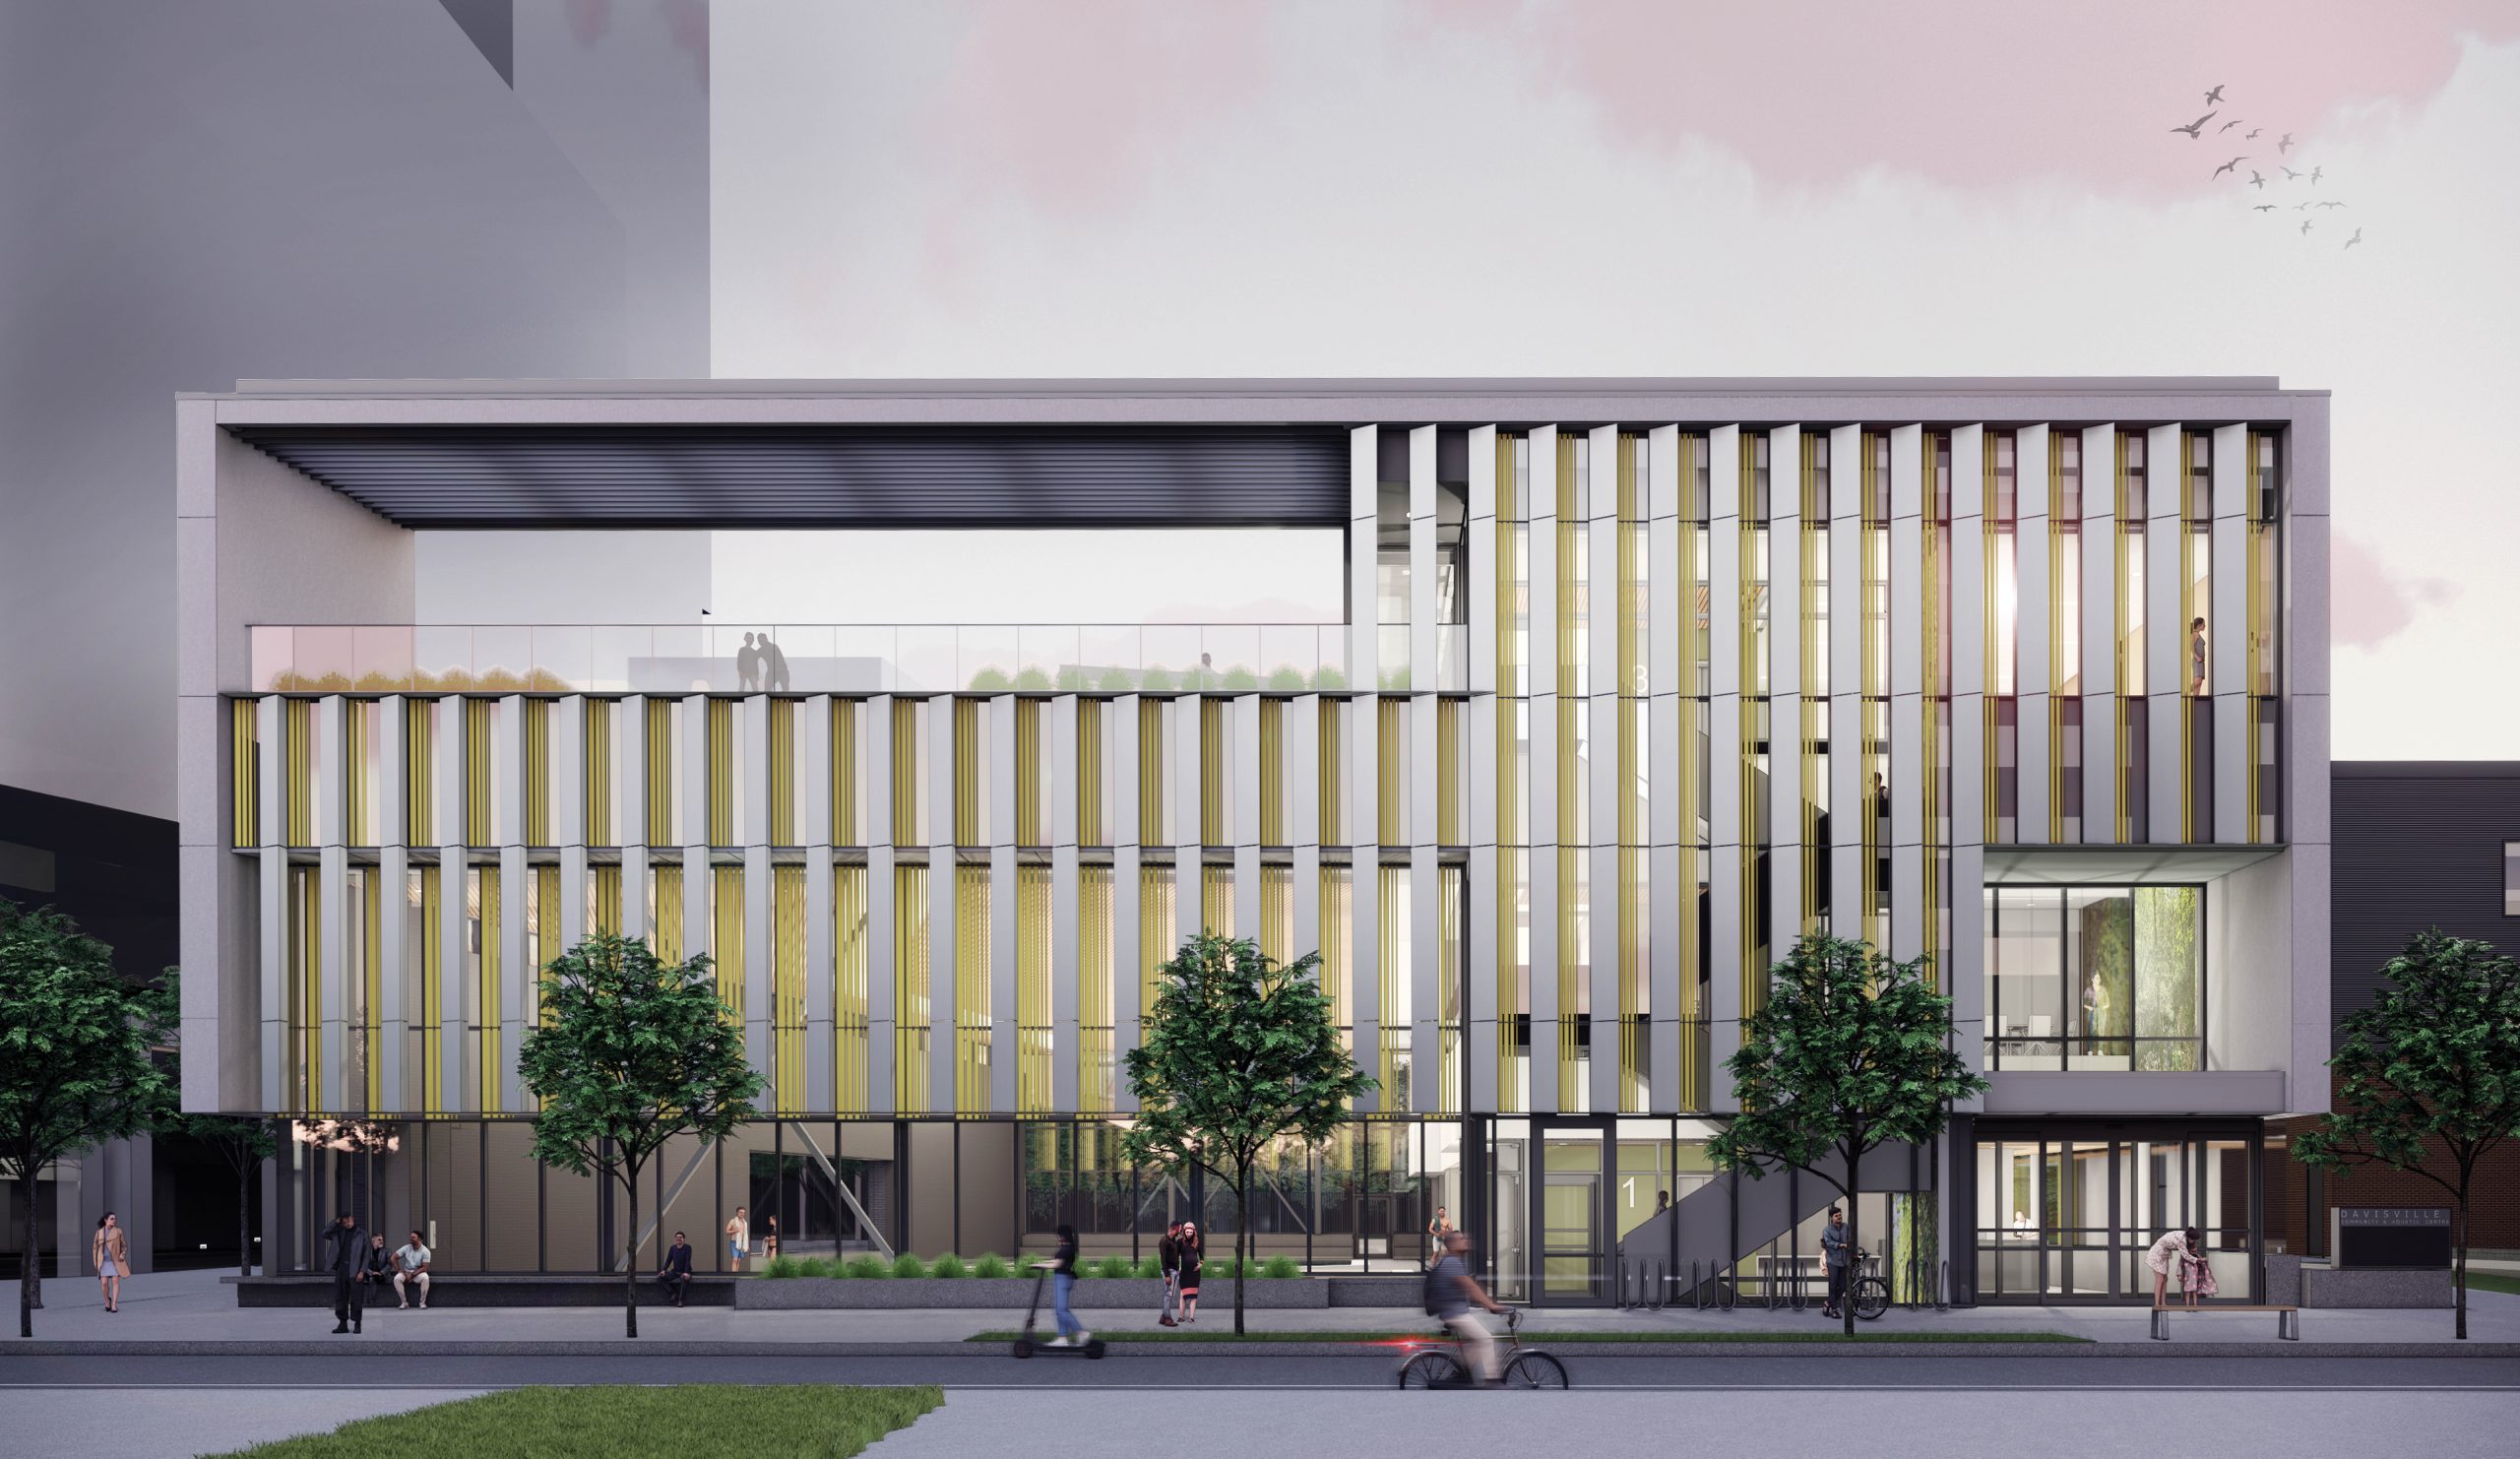 A rendering of the front of the building, looking north from the south side of Davisville Ave. The building is three storeys tall. The main floor façade is glass, and in front of the building are benches, planters, trees and bike parking. The entrance is on the right (east) end. The second and third floor façade include vertical metal louvres and glass, there is a light green colouring through the façade. The third floor is an accessible rooftop on the left(west) side with a pergola. The right (east) side is a continuation of the façade.